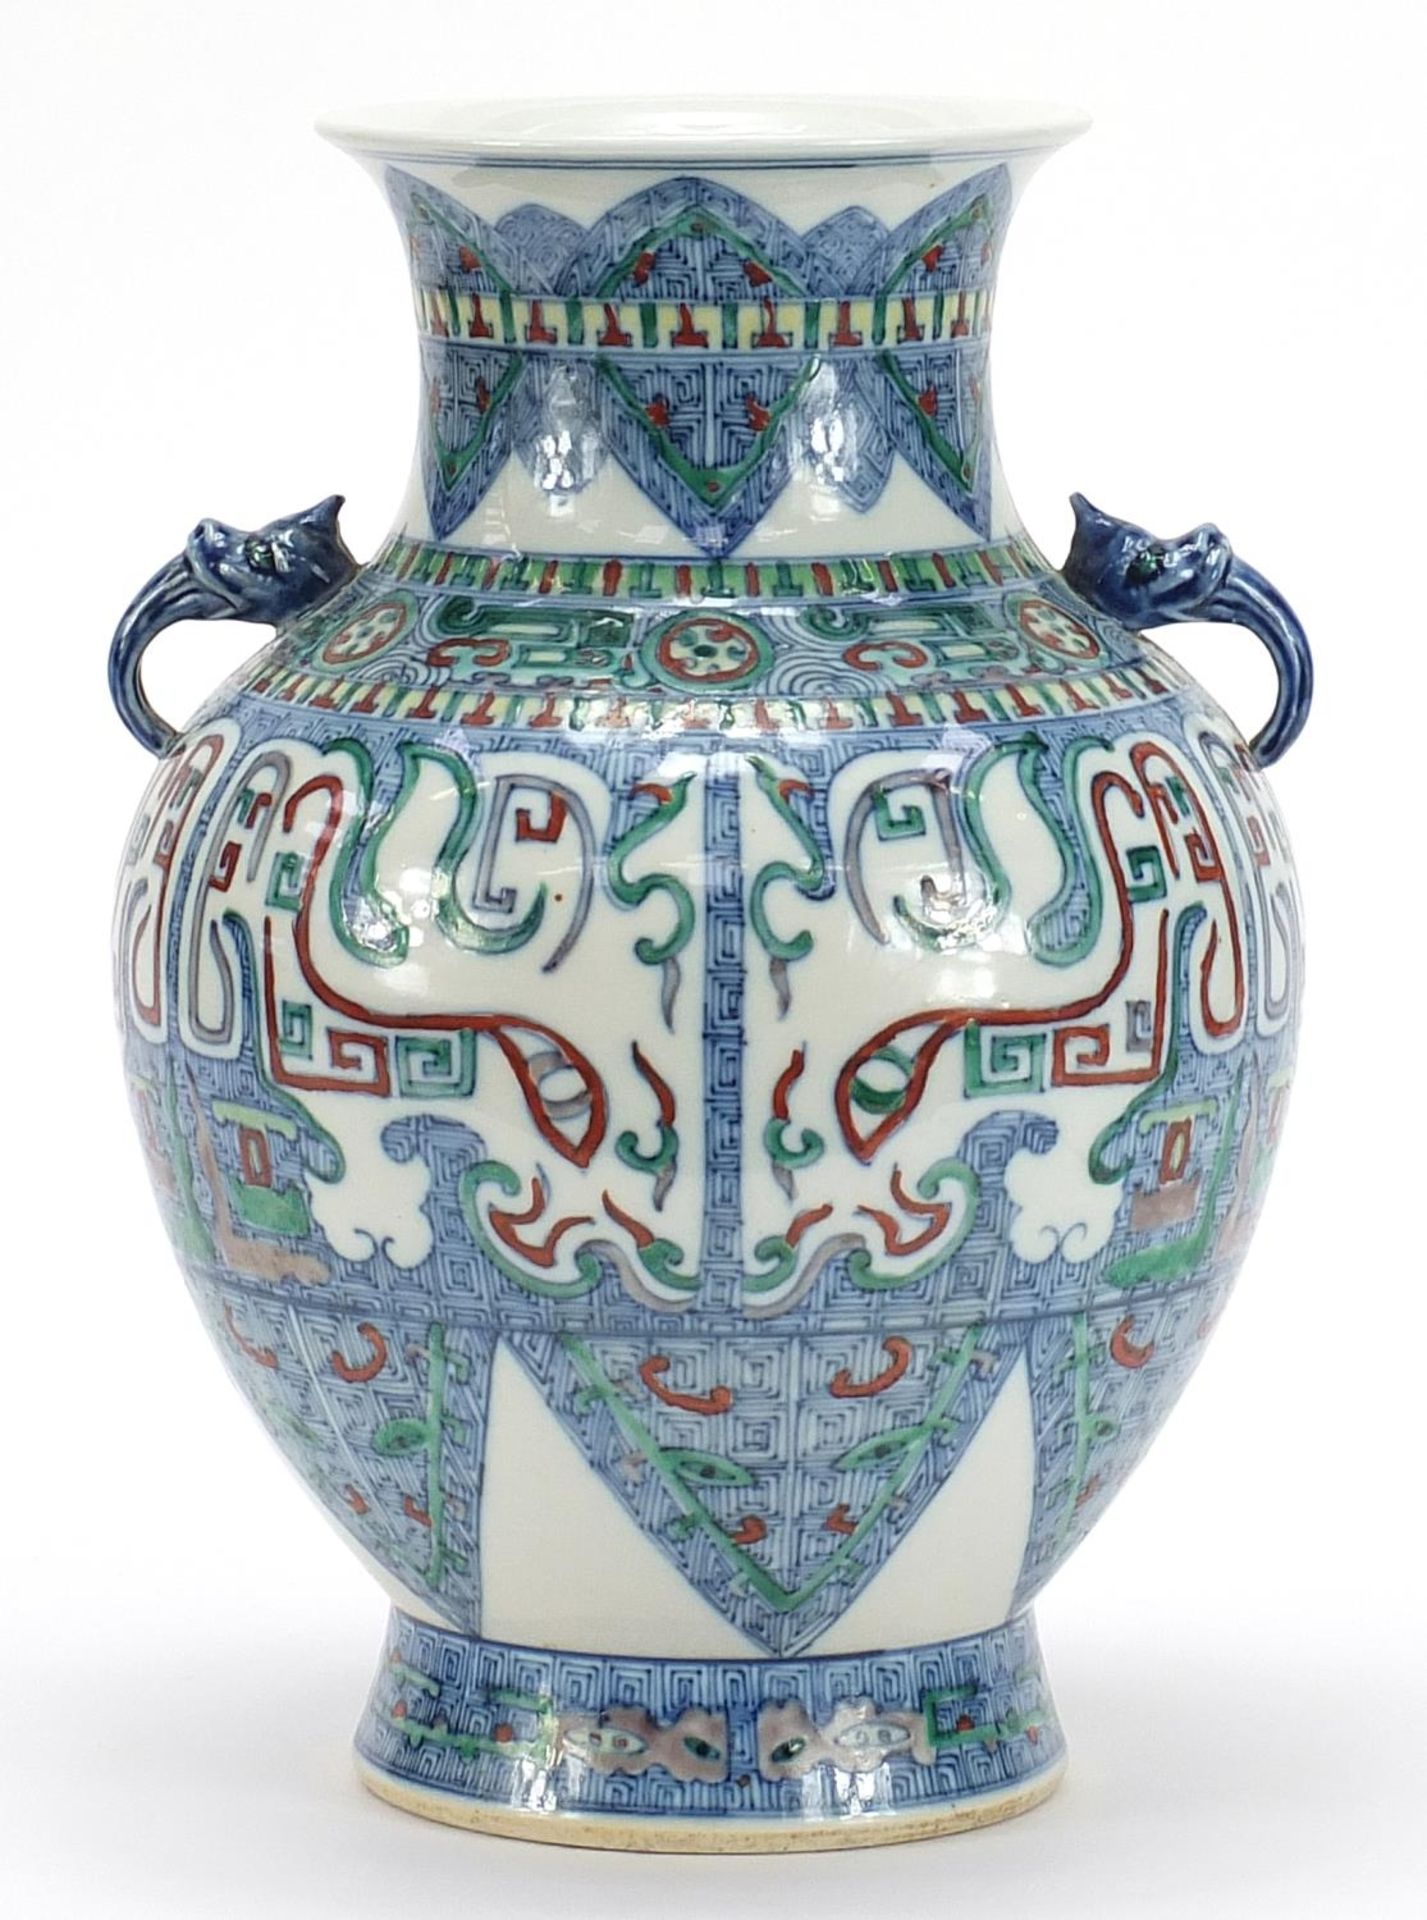 Chinese doucai porcelain vase with handles, hand painted with mythical faces and heads, six figure